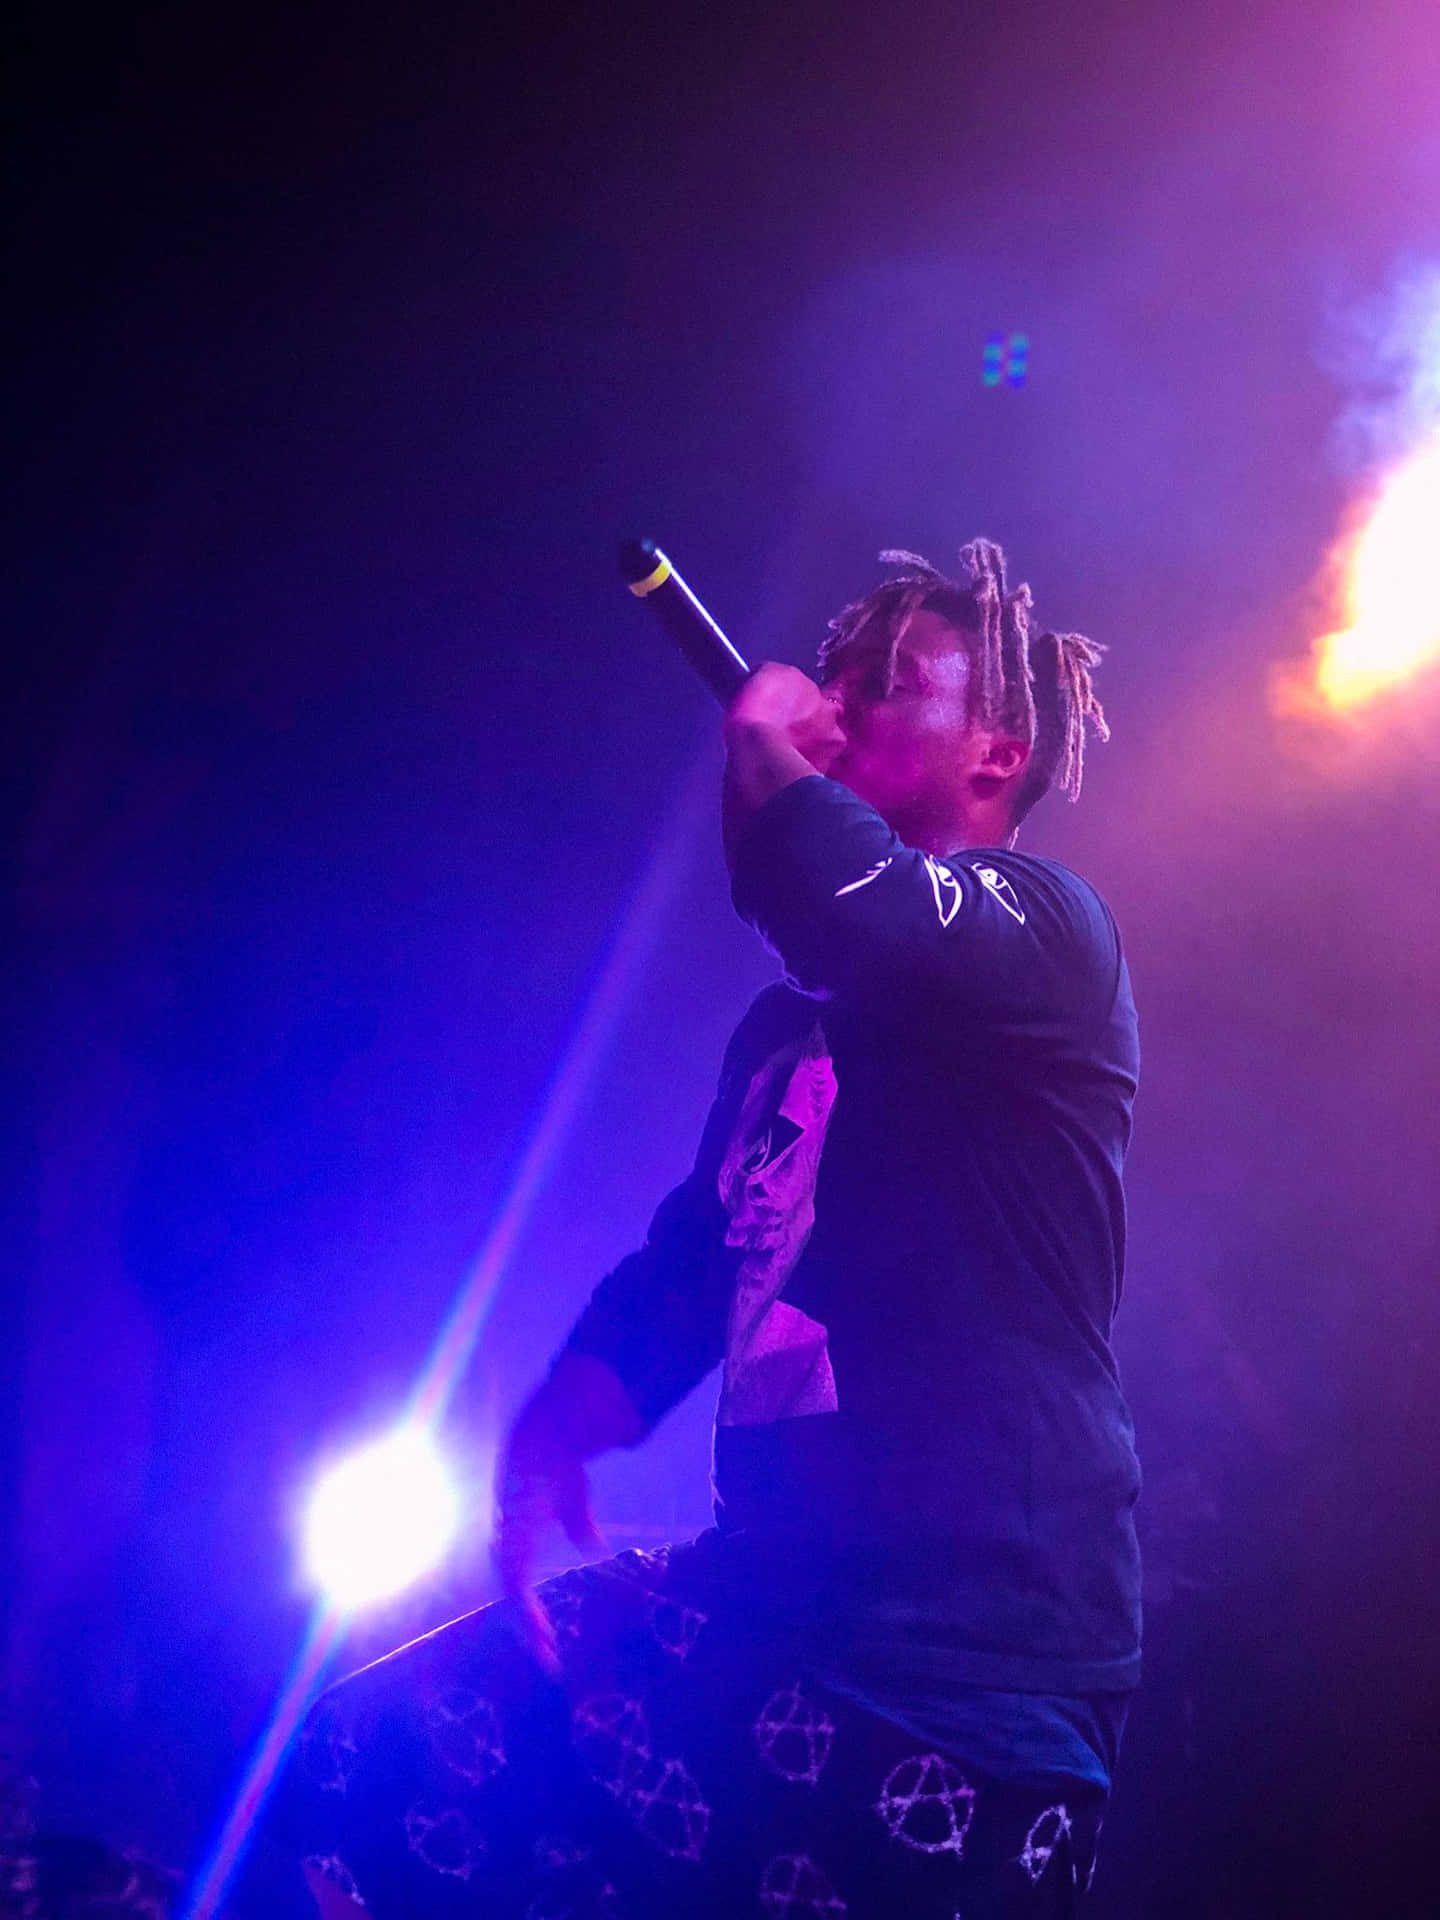 Get Ready for the Amazing Live Performance of Juice Wrld Wallpaper